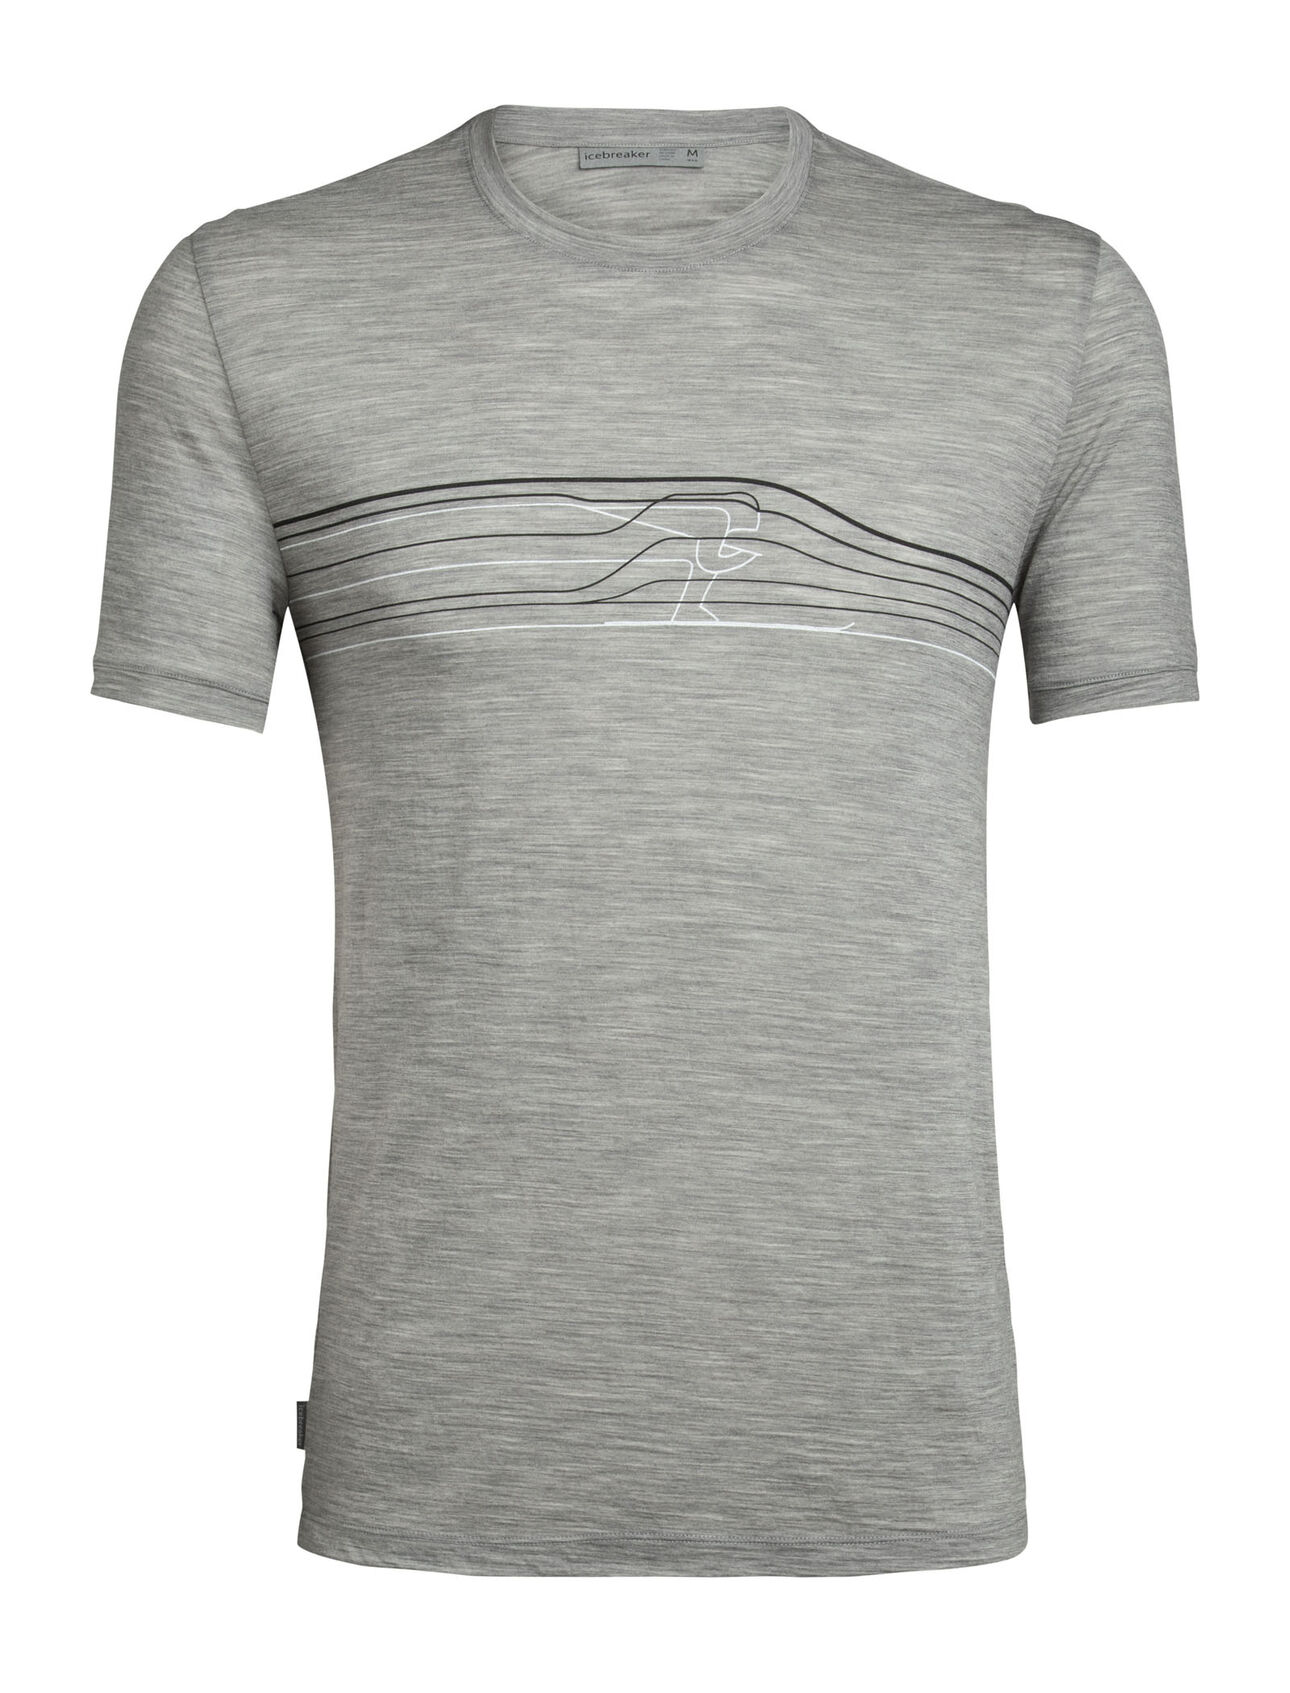 para hombre Merino Spector Short Sleeve Crewe T-Shirt Ski Racer A lightweight, breathable, and versatile merino wool T-shirt ideal for everything from hiking to travel, our Spector Short Sleeve Crewe Ski Racer is a go-to for any and every day.